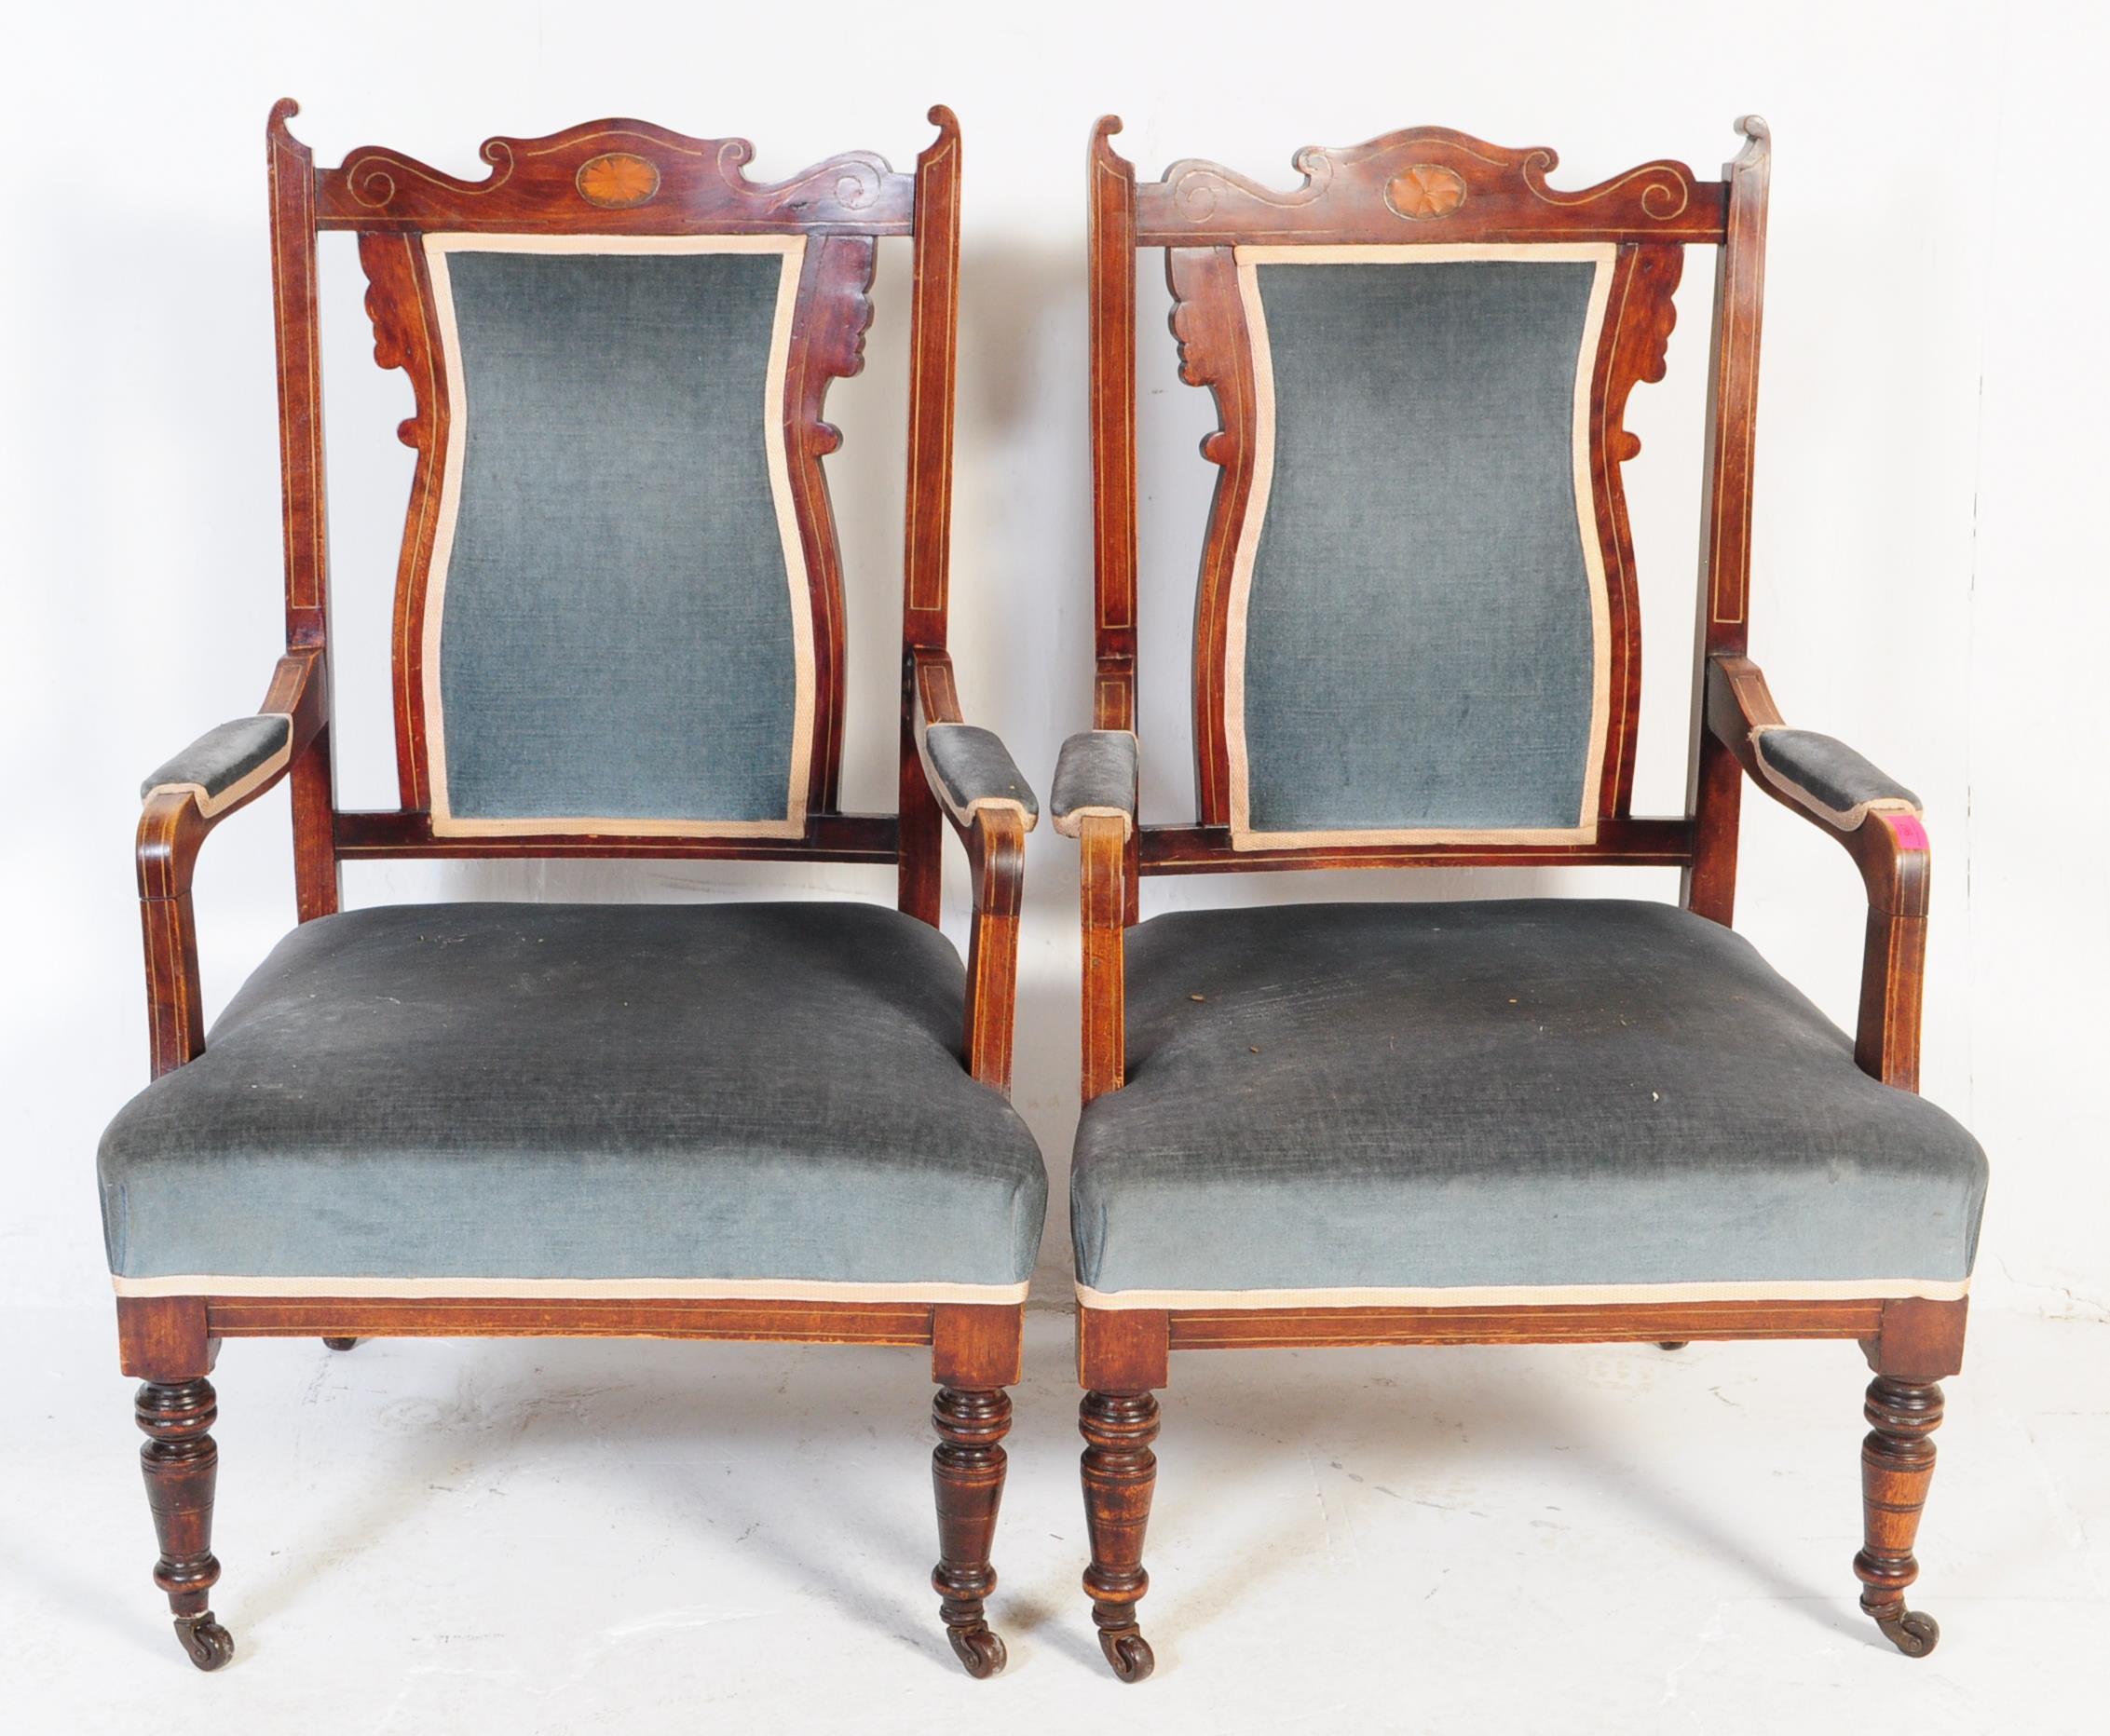 PAIR OF 19TH CENTURY VICTORIAN MAHOGANY ARMCHAIRS - Image 2 of 8